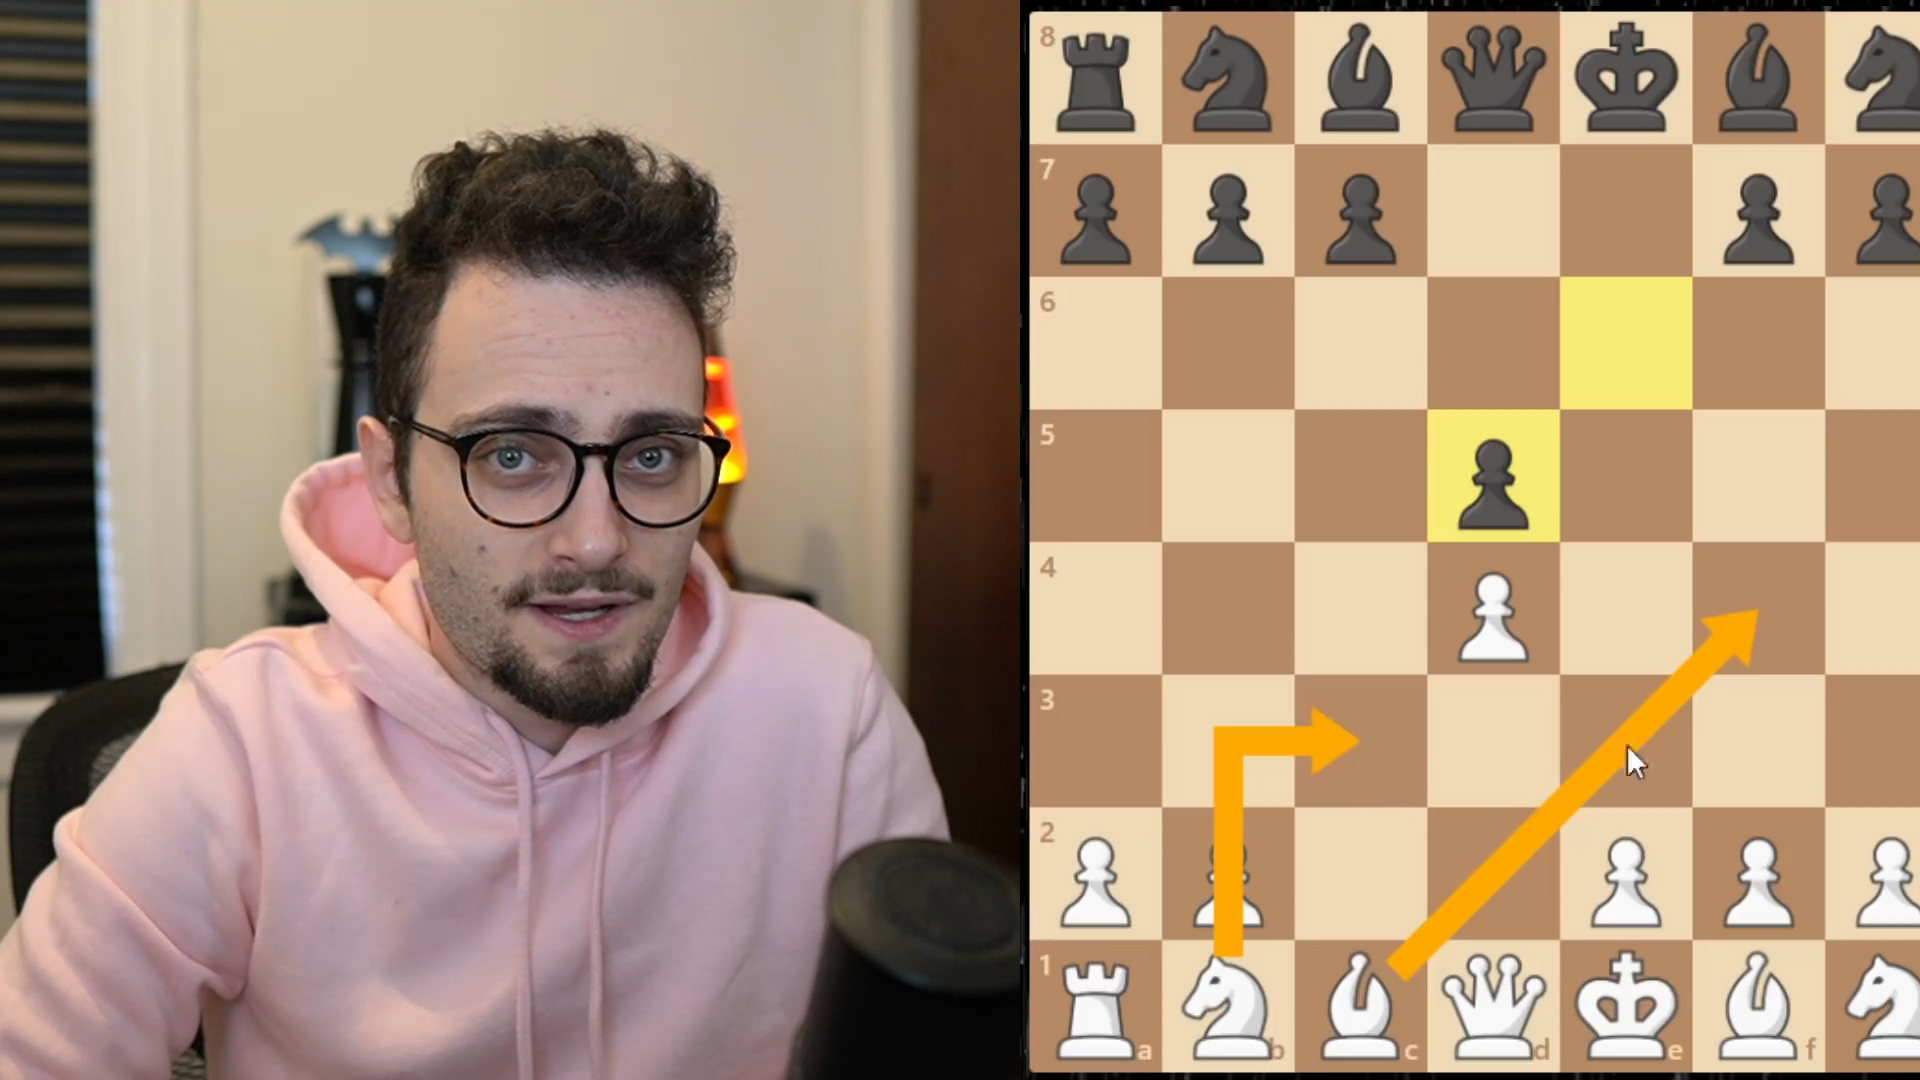 wHatS tHe chEckLisT? Ft Gotham chess,Levy 